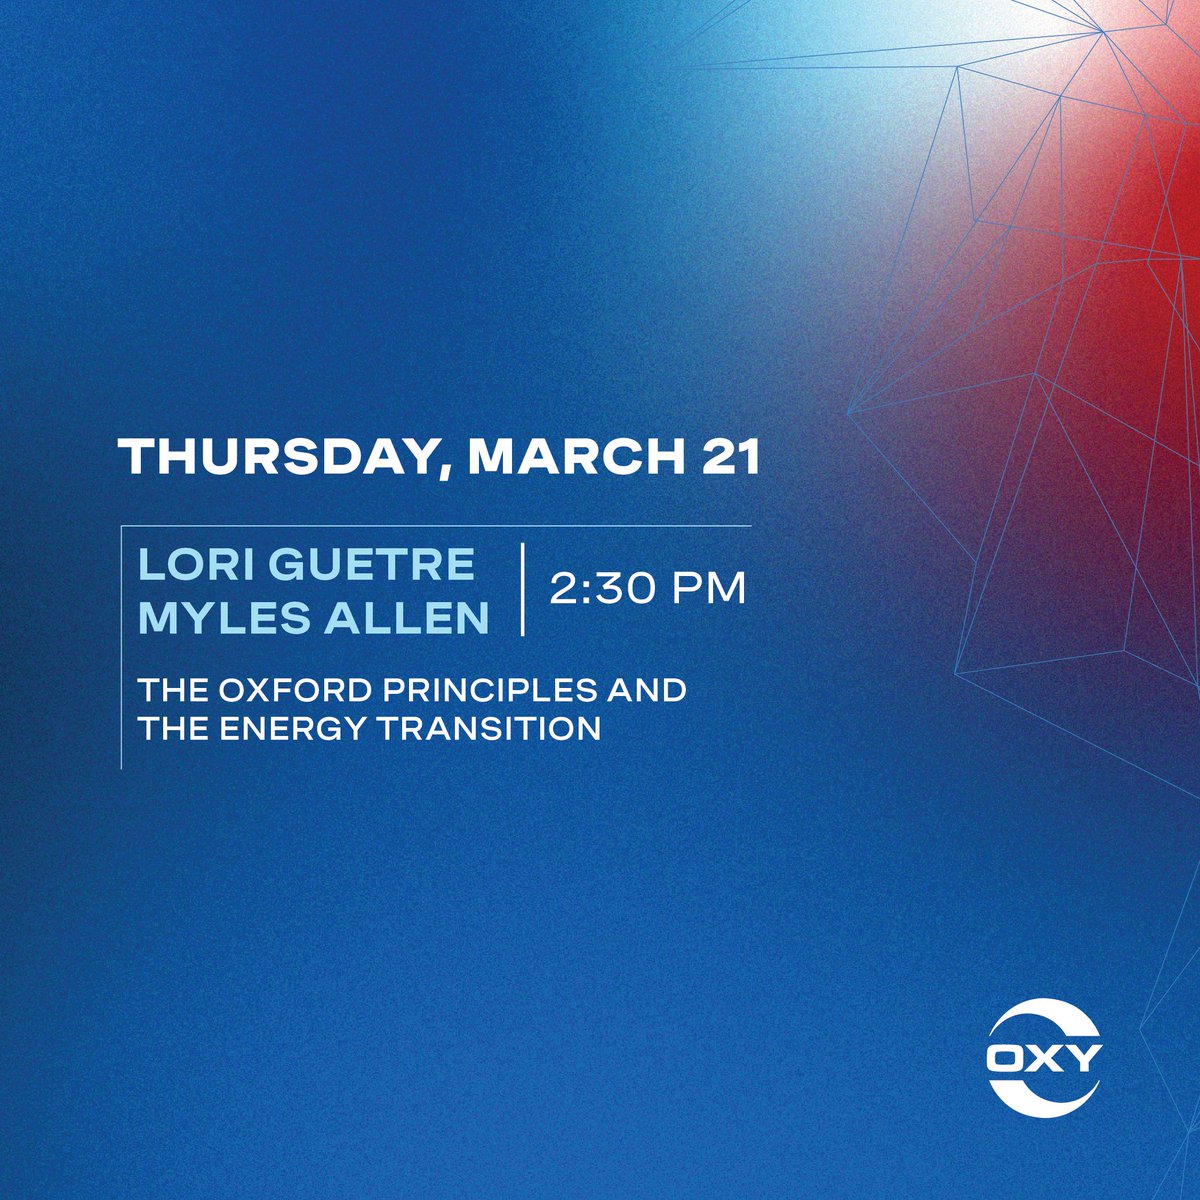 Last call! 📣 Professor Myles Allen from the University of Oxford is joining 1PointFive’s Lori Guetre to discuss the Oxford Principles and the energy transition. 

Make your way over to Oxy's Partner House in the Innovation Agora this afternoon.

#CERAWeek #CWAgora